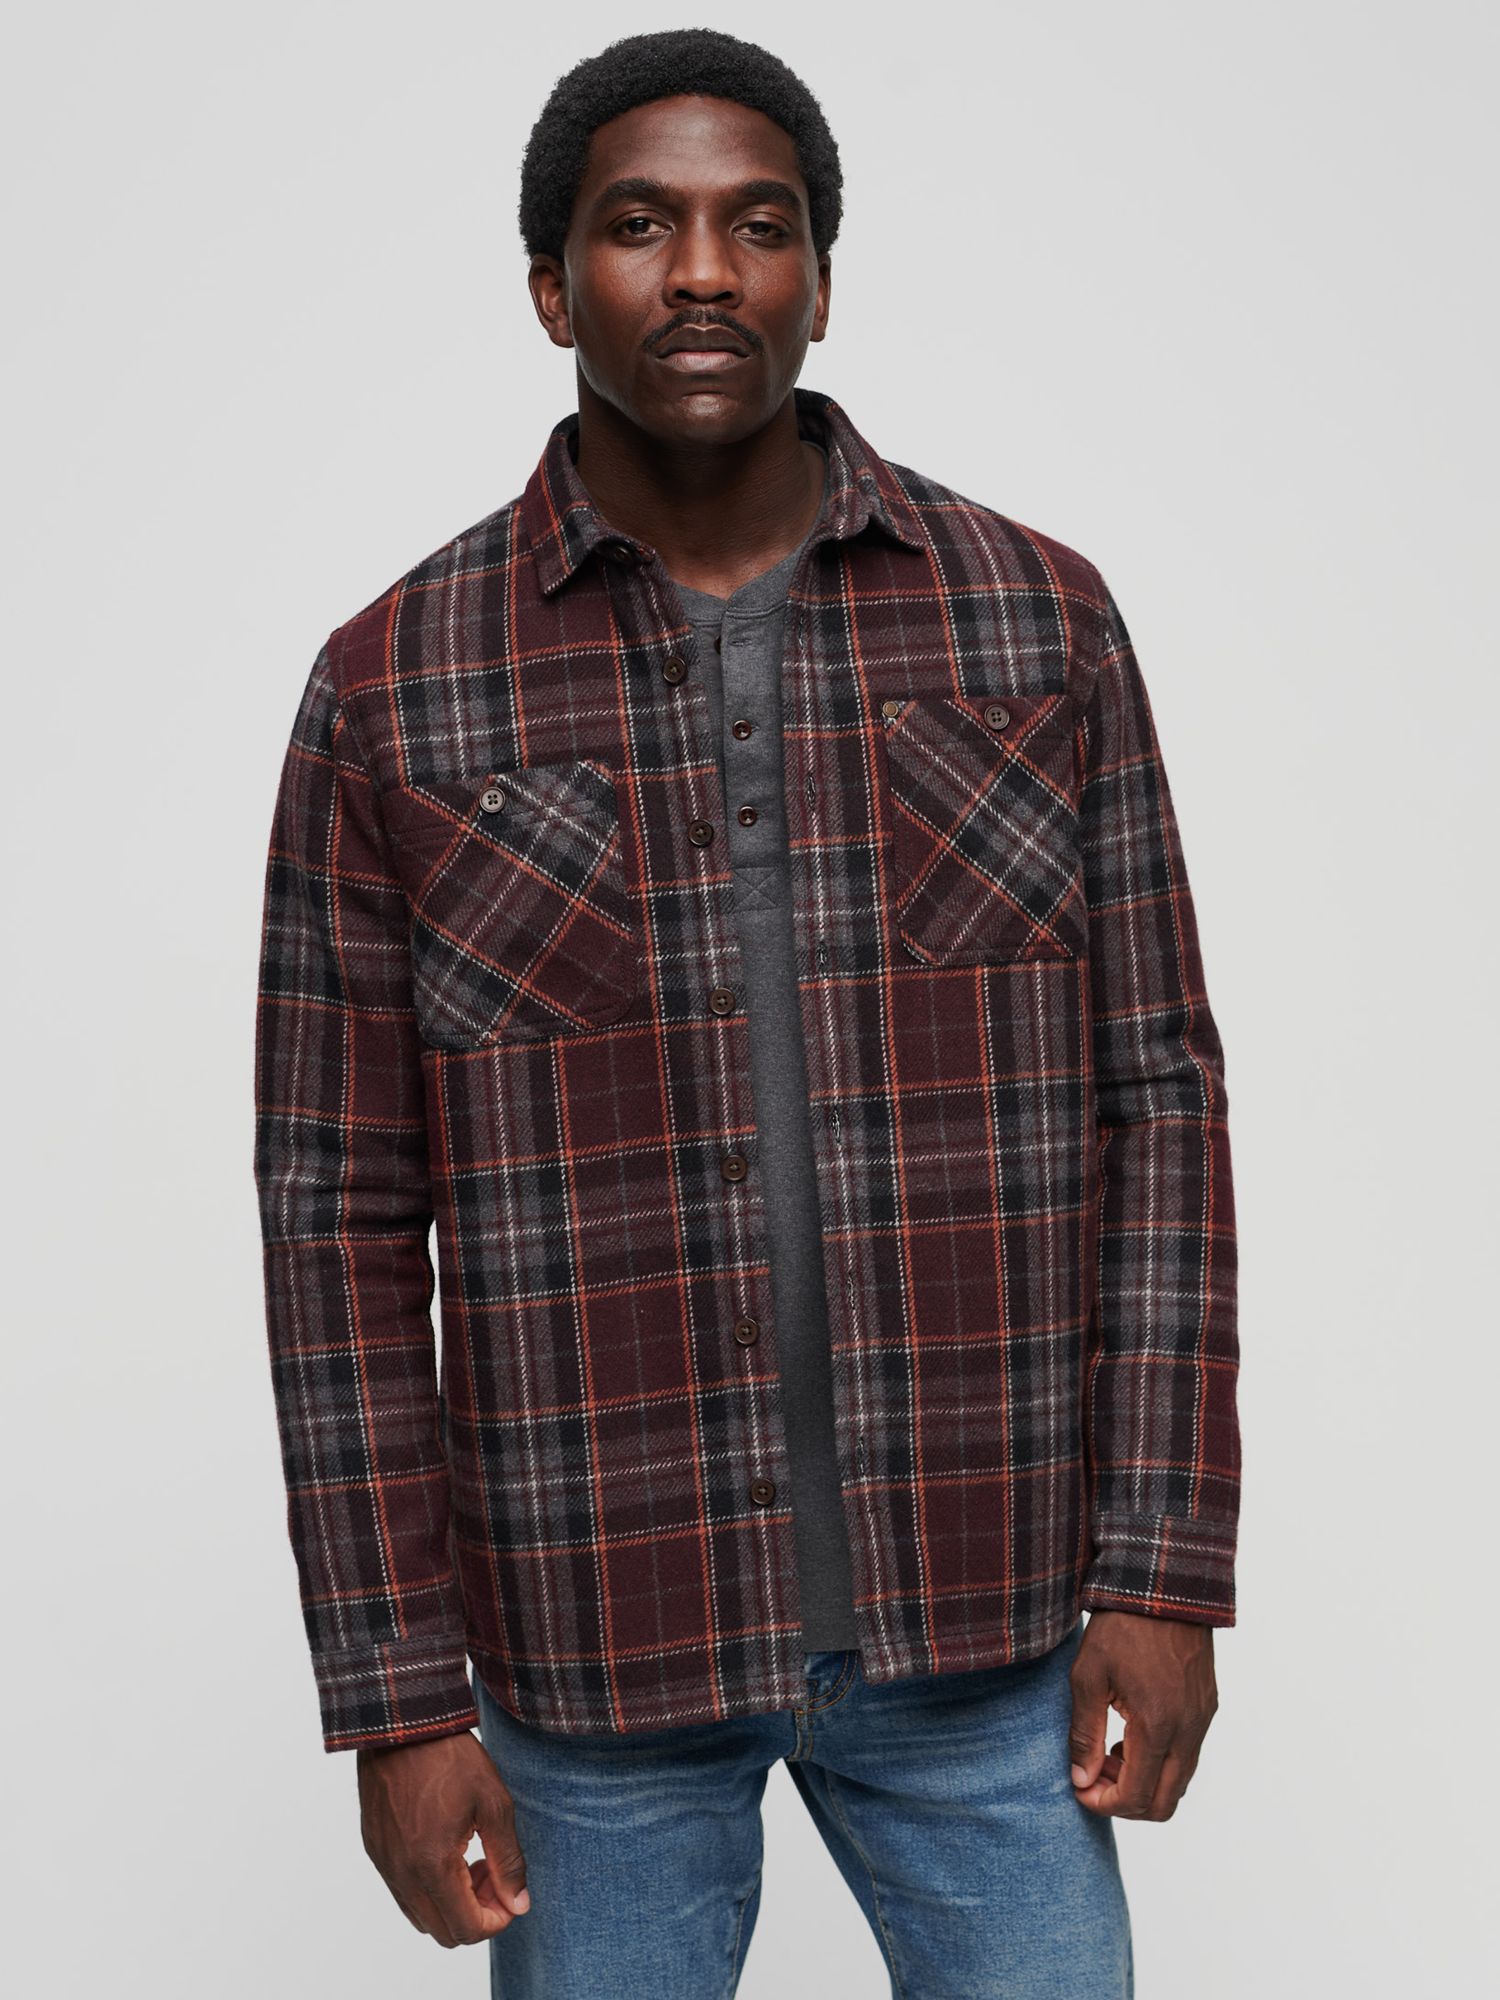 Superdry The Merchant Store Quilted Check Overshirt, Chocolate Brown/Multi, S